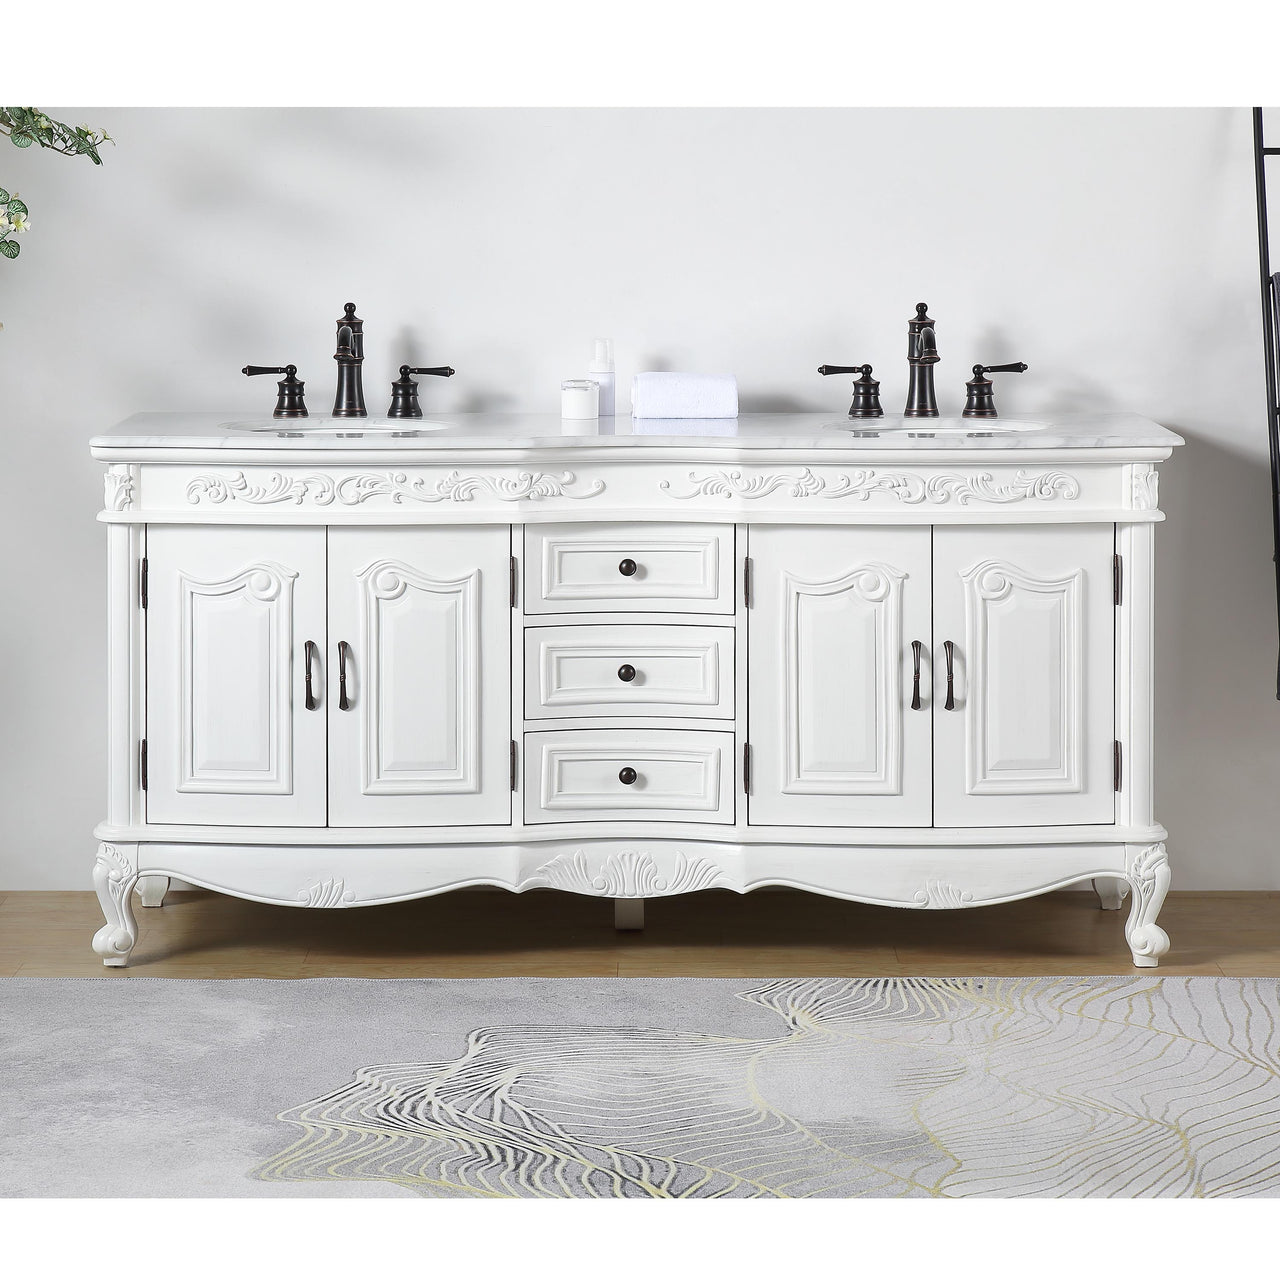 SilkRoad 72" Double Sink White Cabinet - Carrara White Marble Top, Ceramic Sink (3-hole)